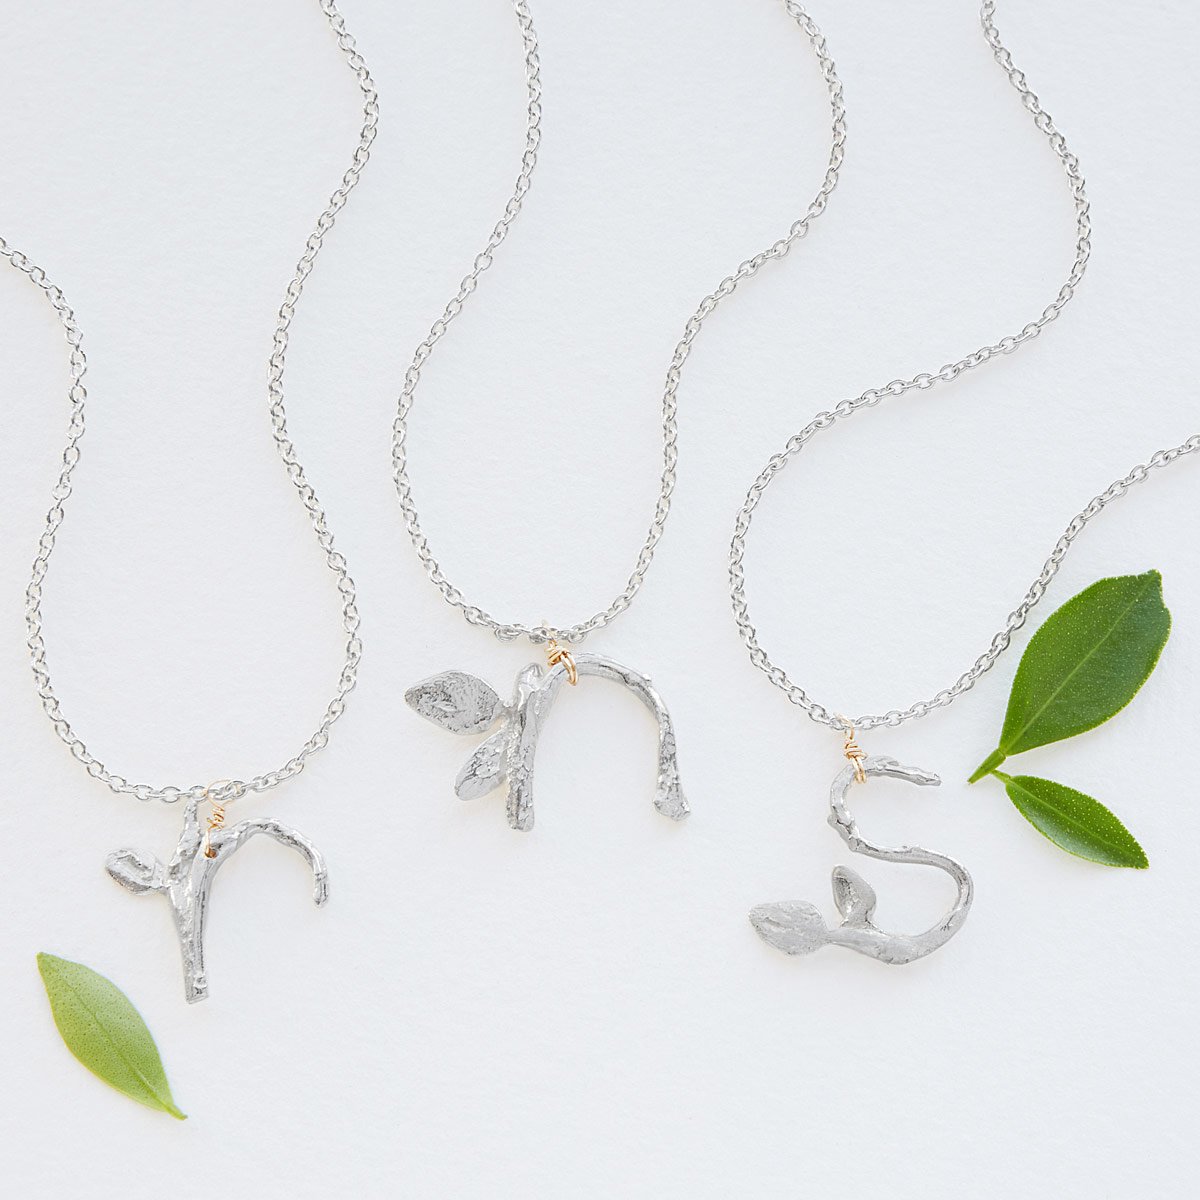 A to Z Letter Necklaces | UncommonGoods